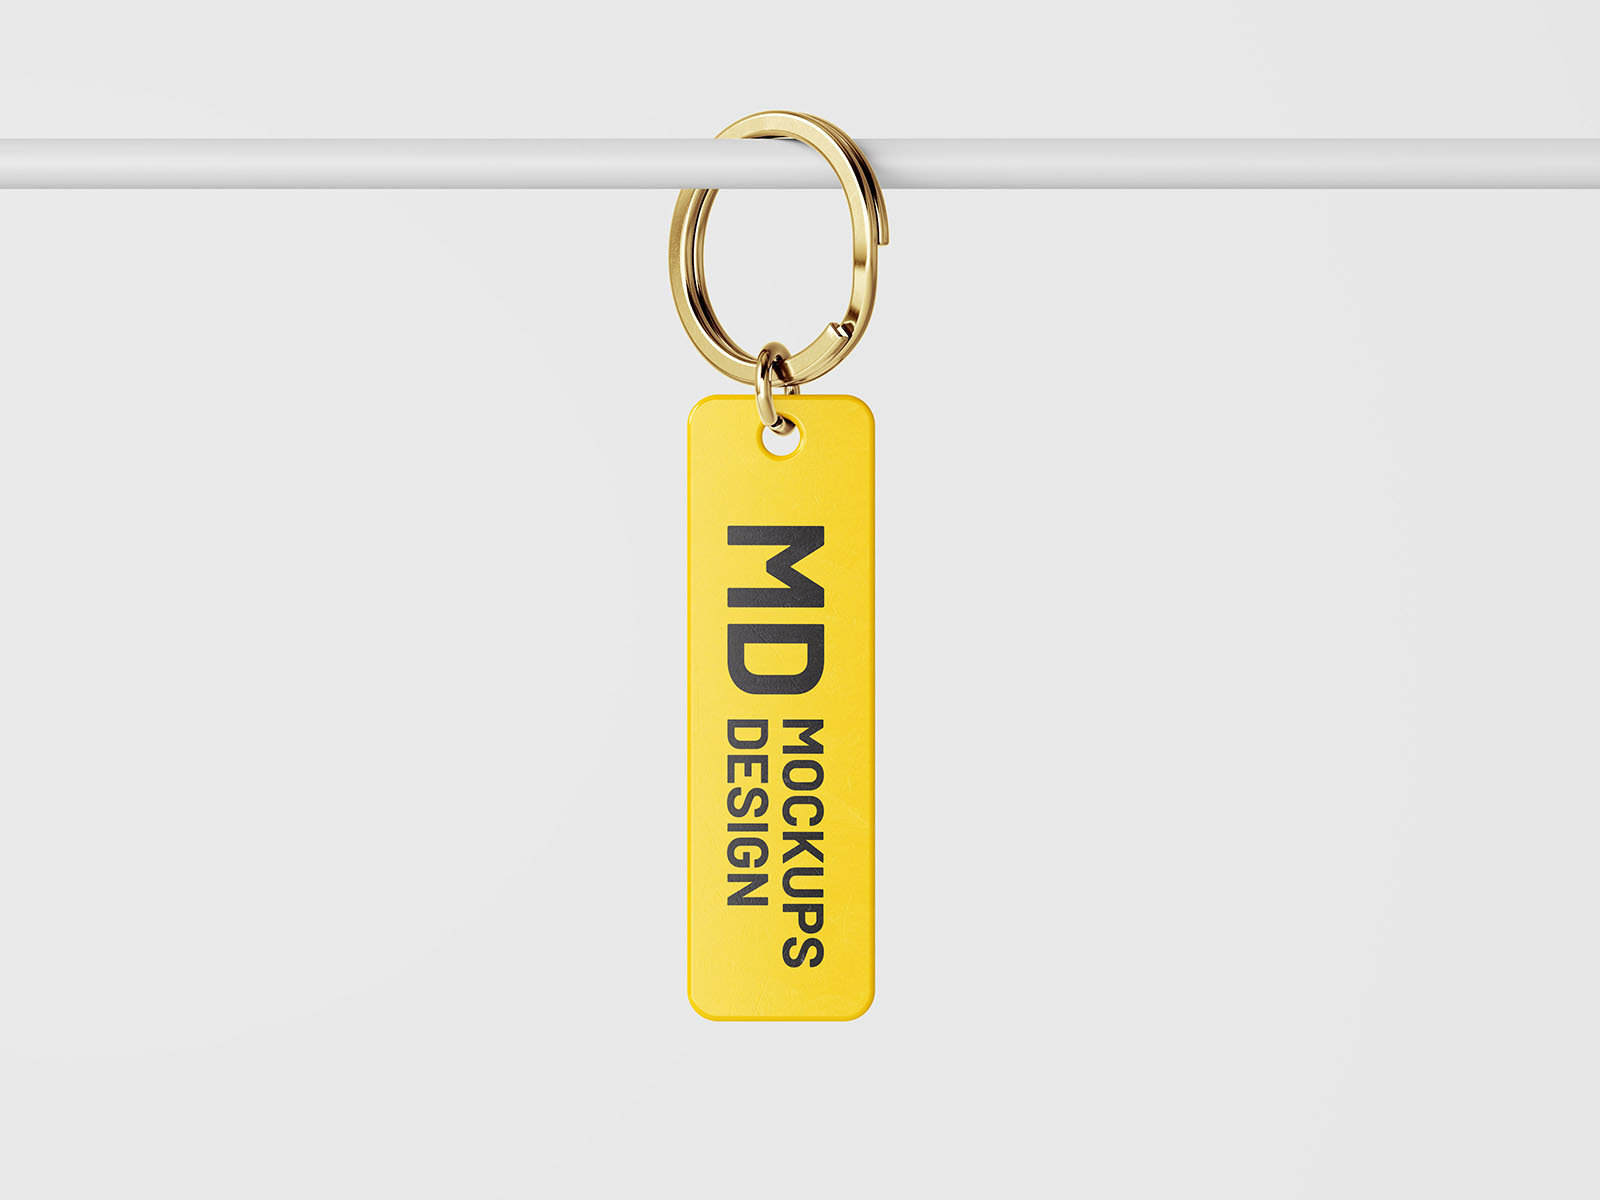 5 Rectangle Keychain Mockups in Varied Visions FREE PSD